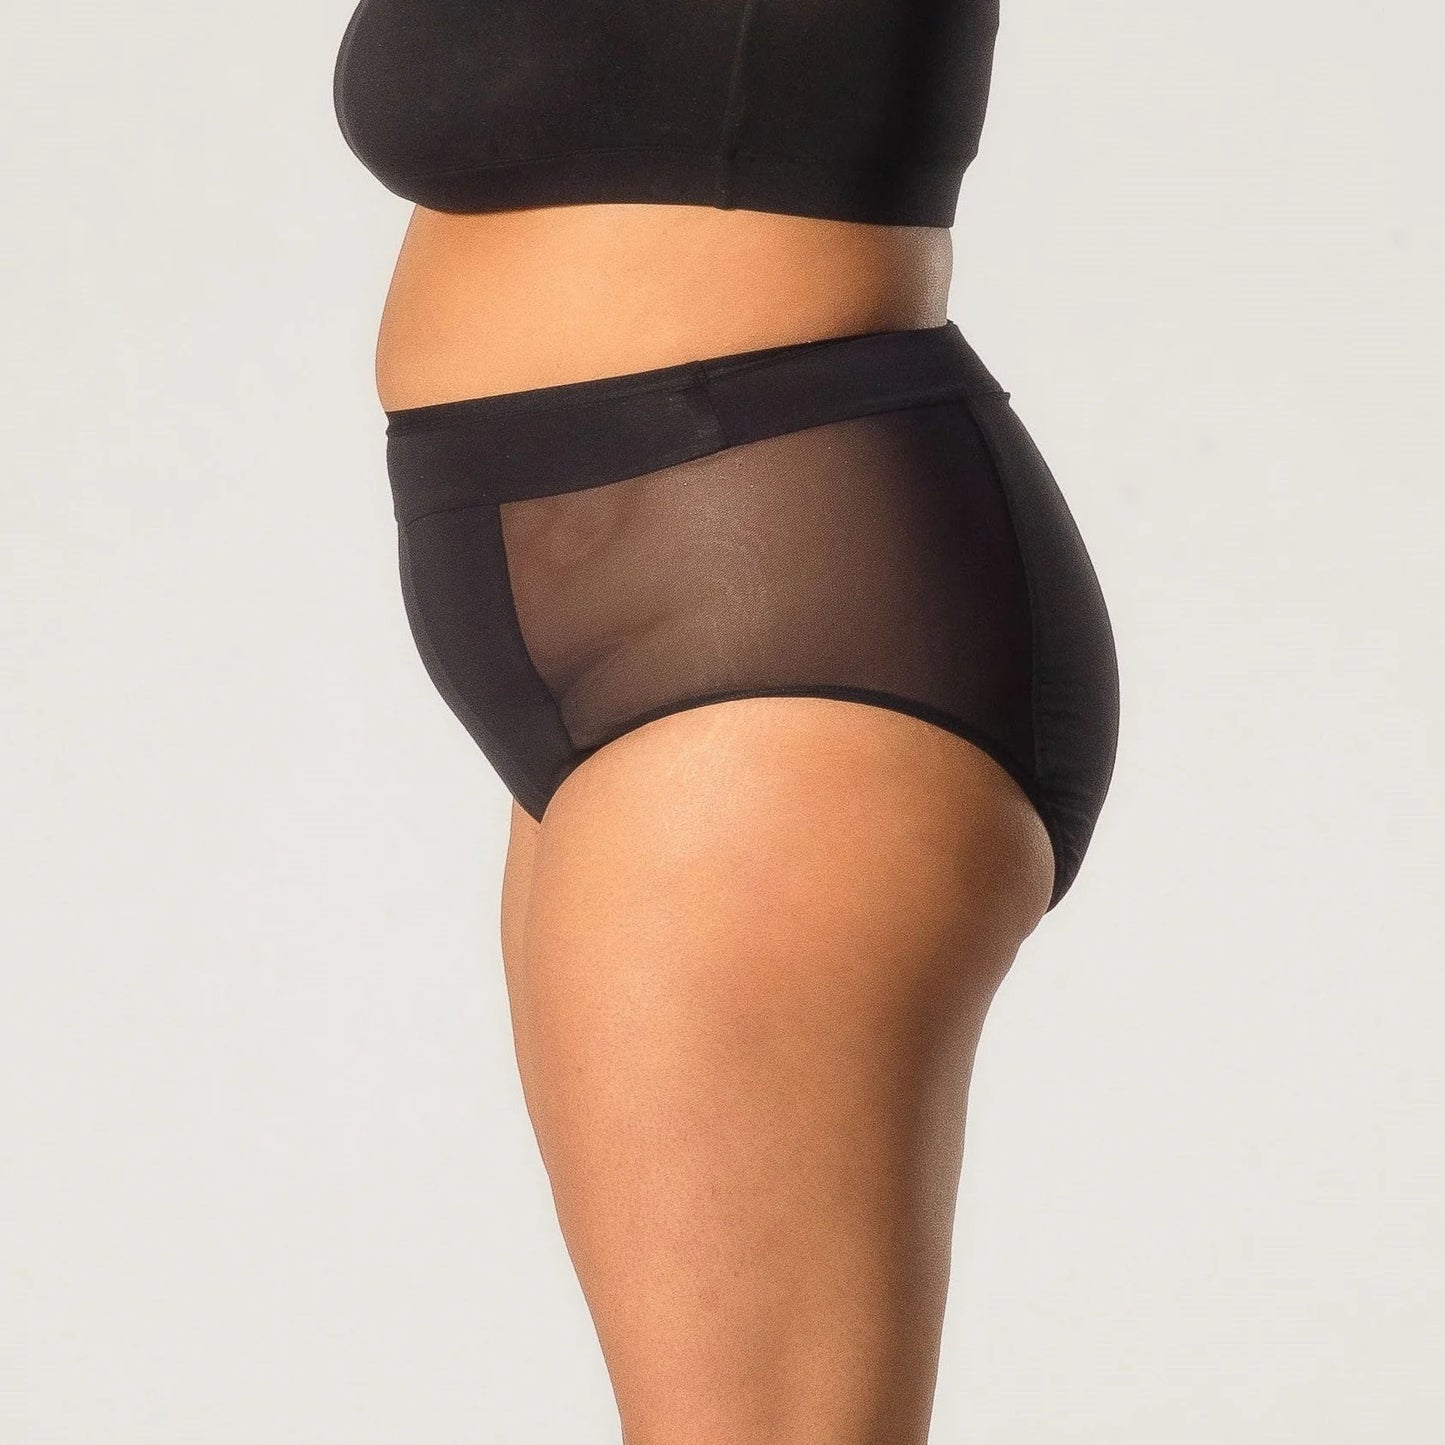 Freya High Waist with Mesh - Super Leakproof Protection